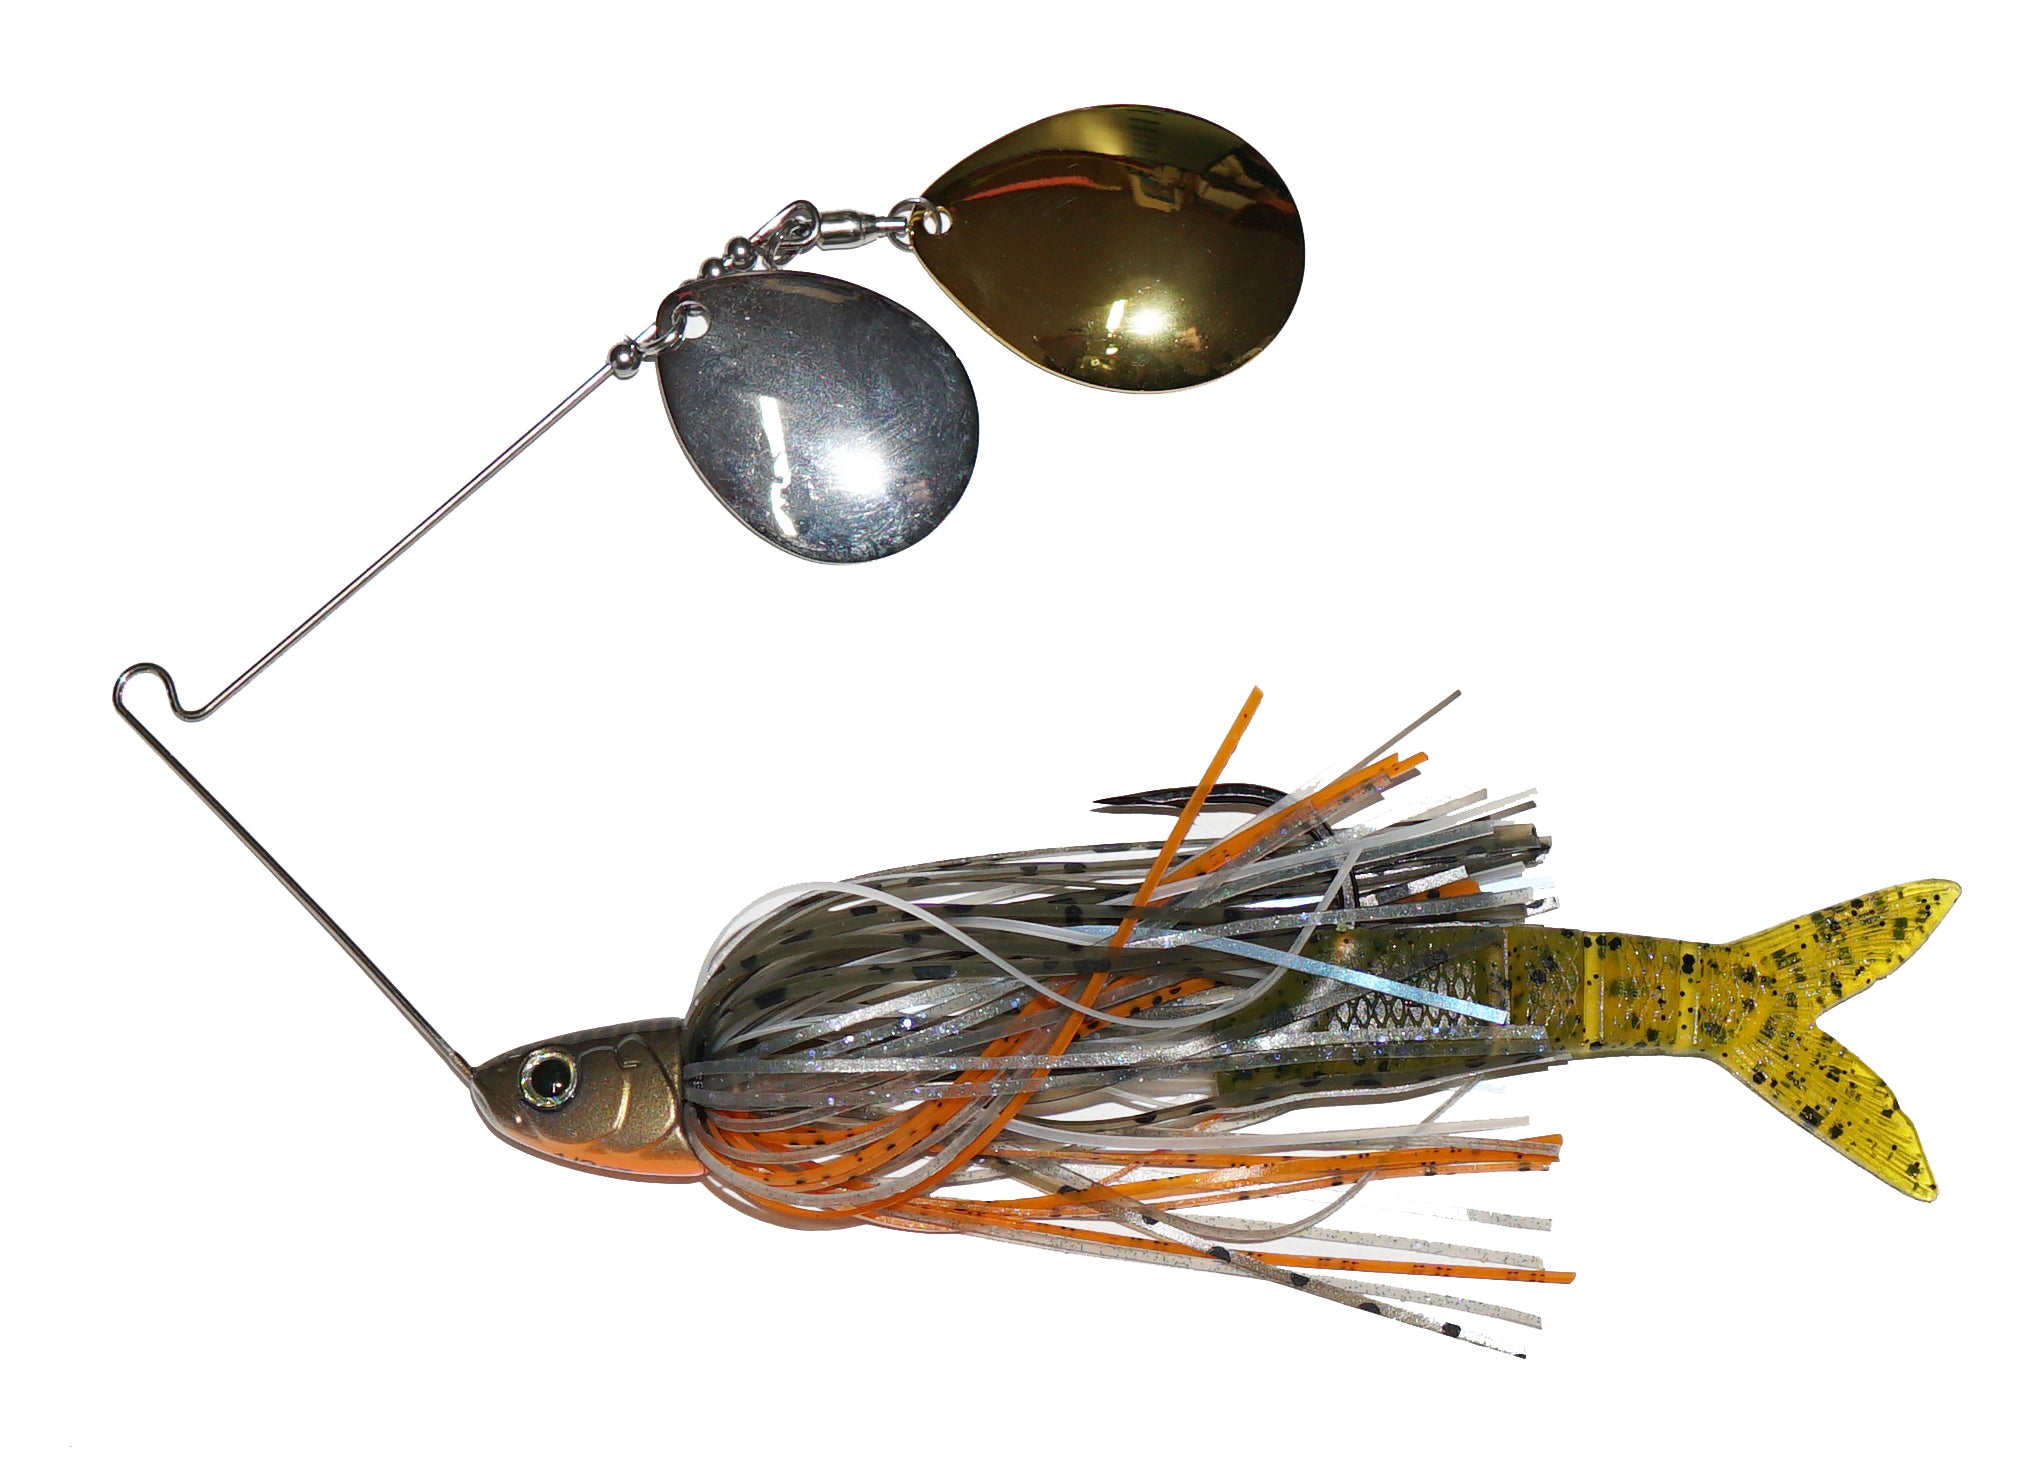 Artificial Fly Fishing, Spinnerbaits Fishing